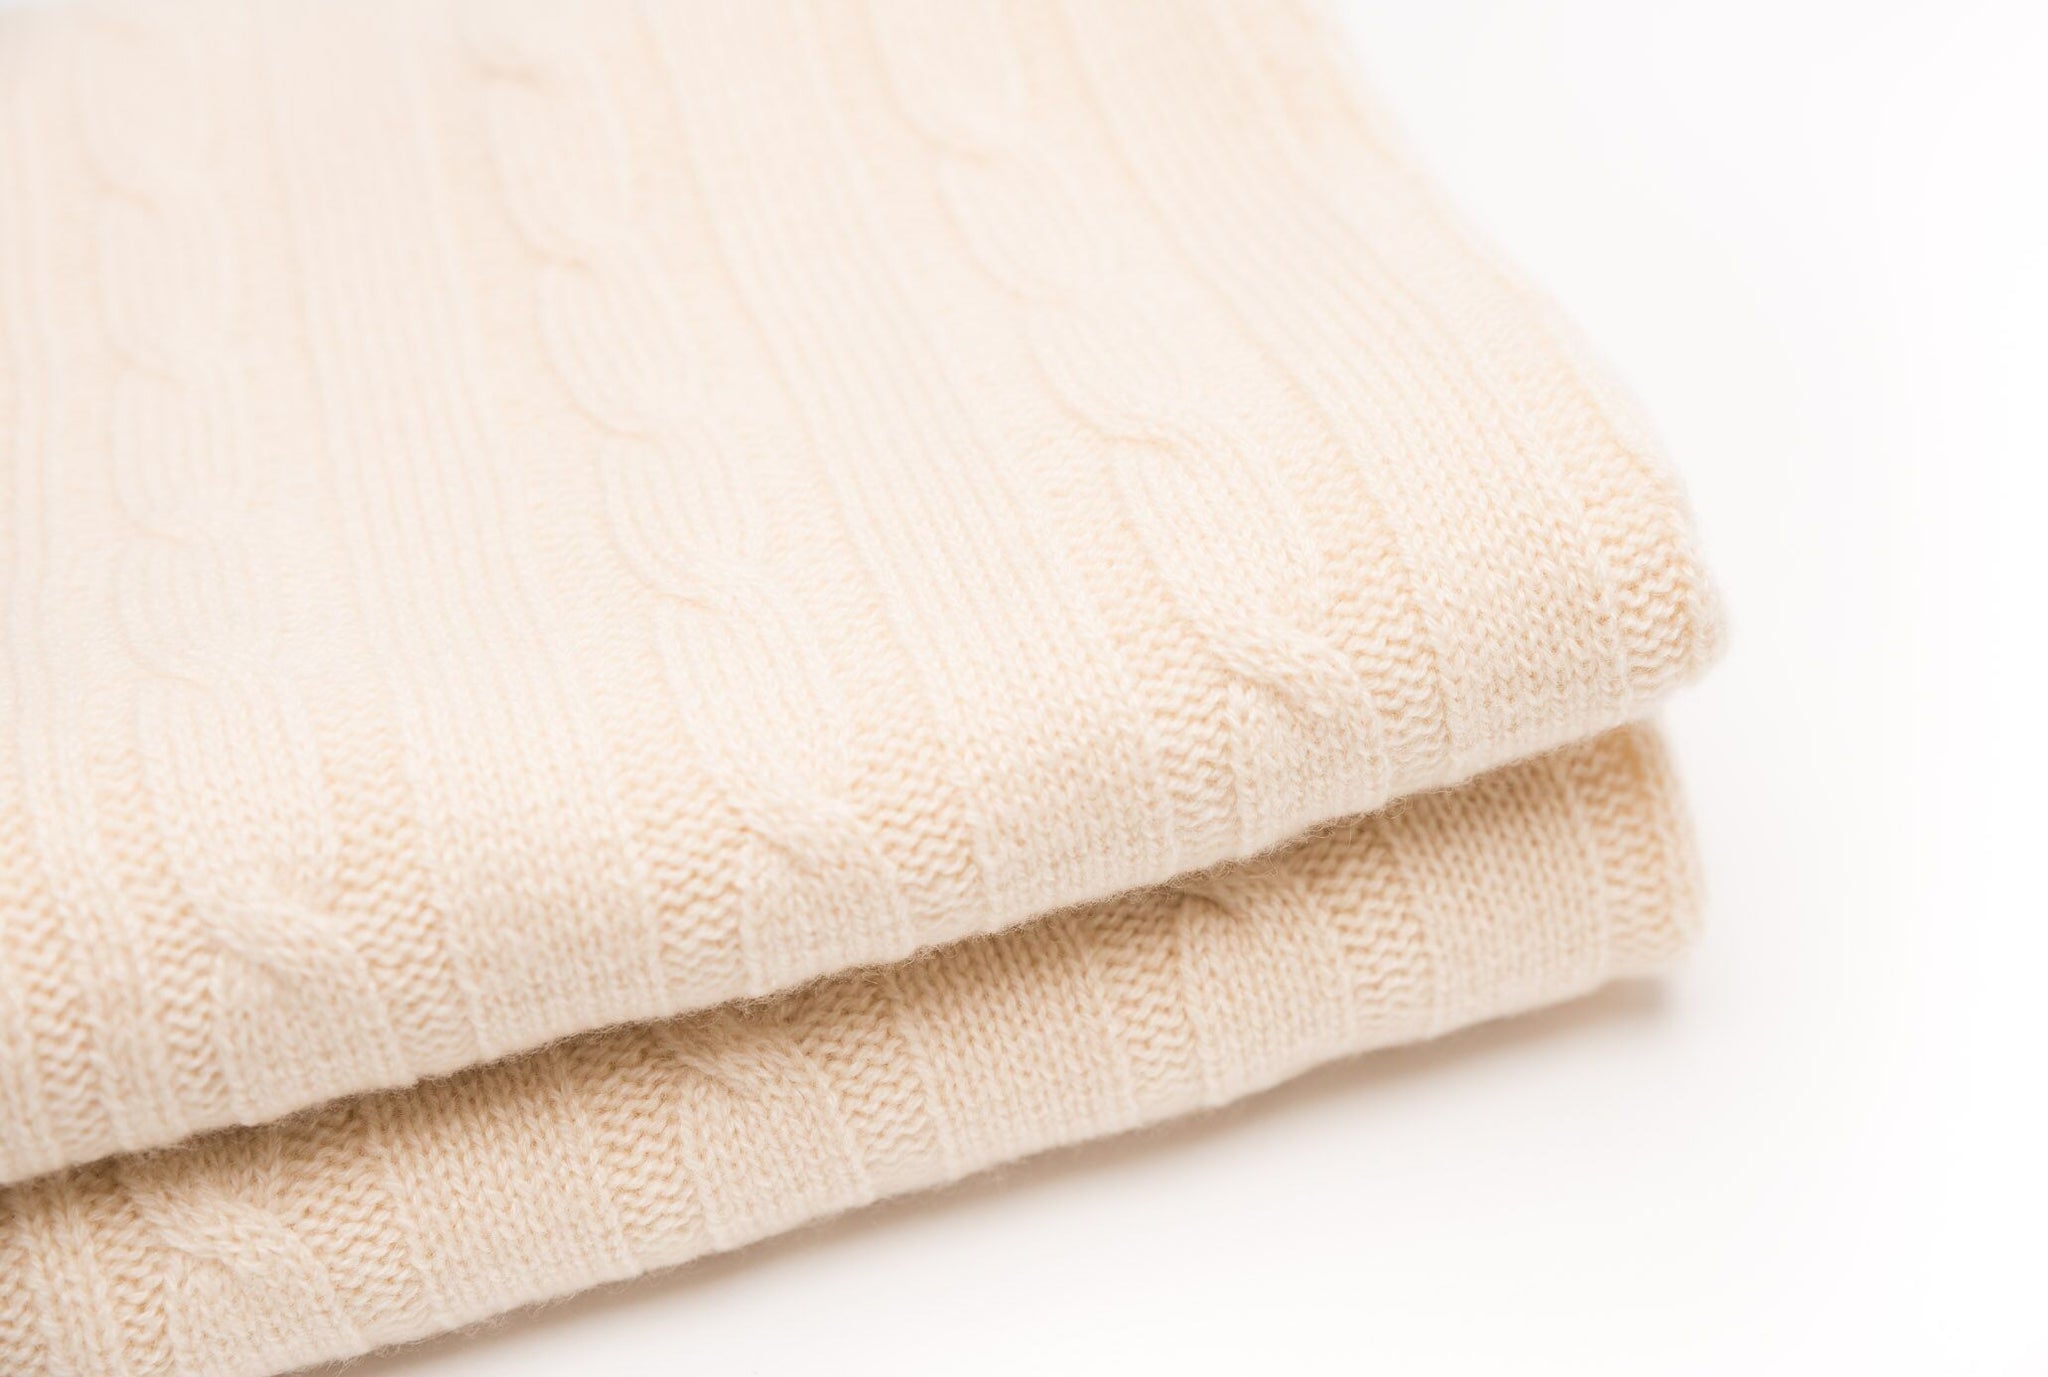 cableknit details, knitting, Nivas Collection, Ivory Blanket, handloom knits